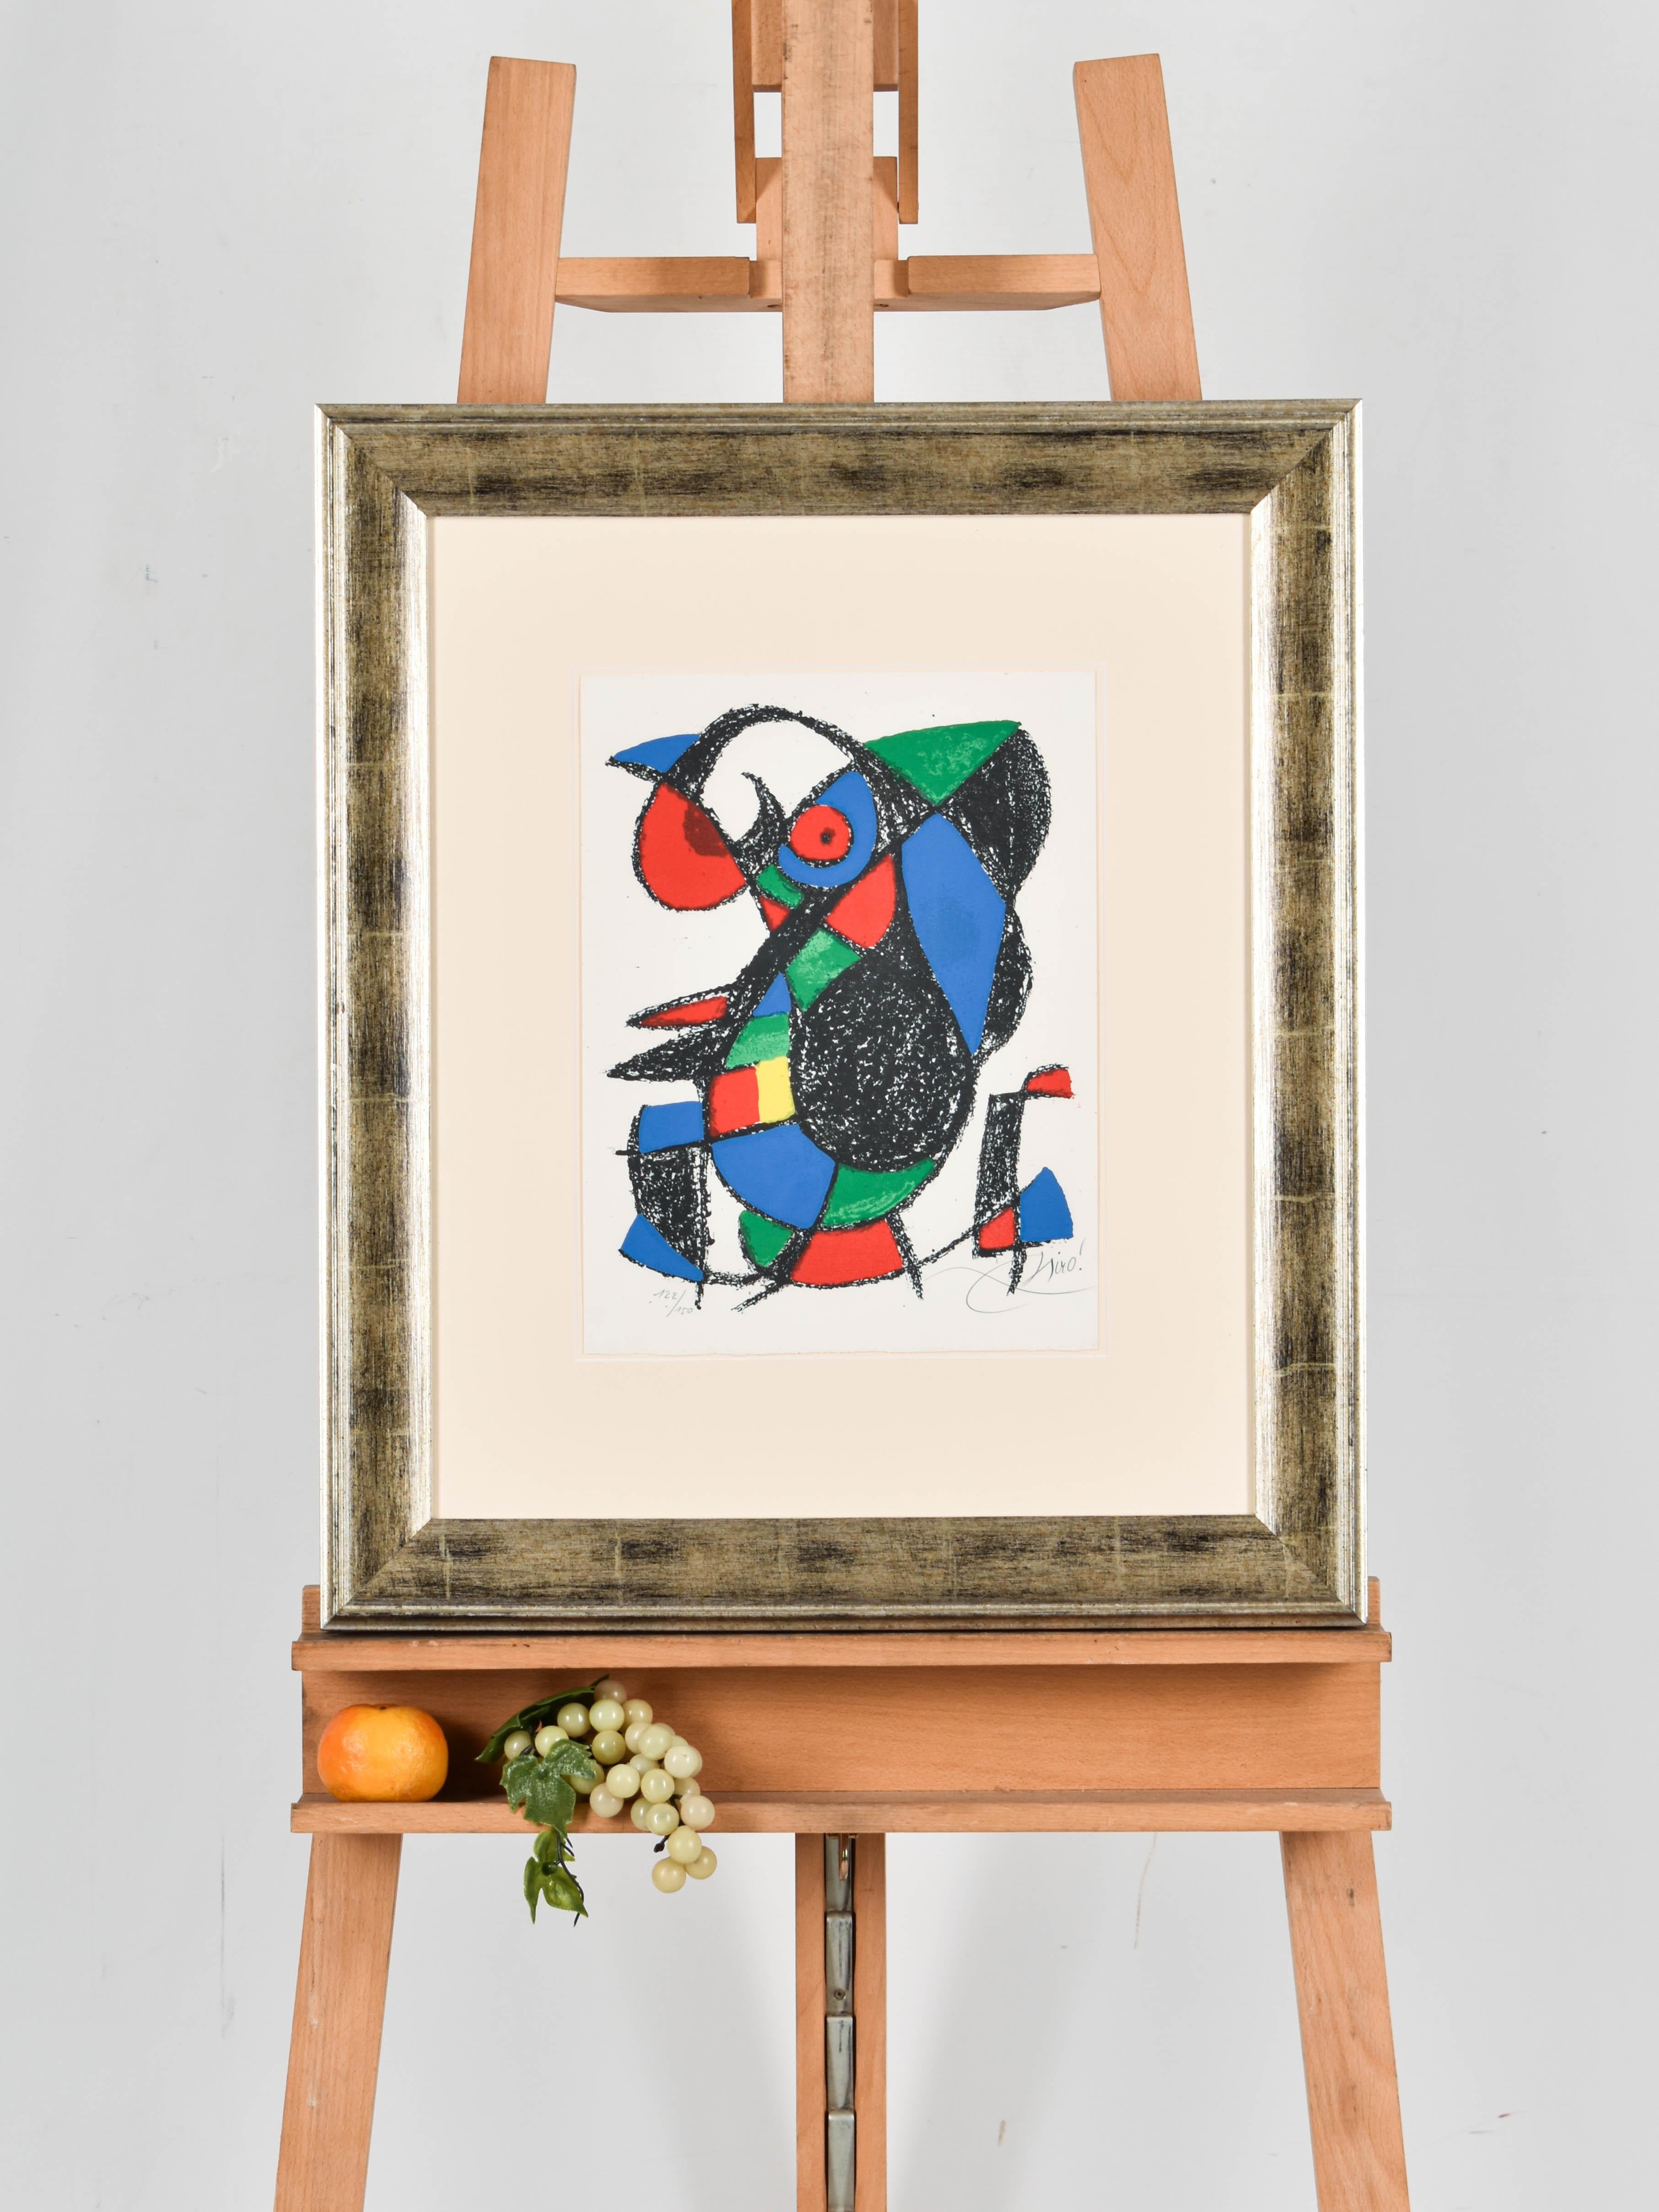 Widely considered one of the leading Surrealists (though he was never officially part of the group), Joan Miró was also a pioneer of automatism: a method of spontaneous drawing that attempted to express the inner workings of the human psyche. Miró